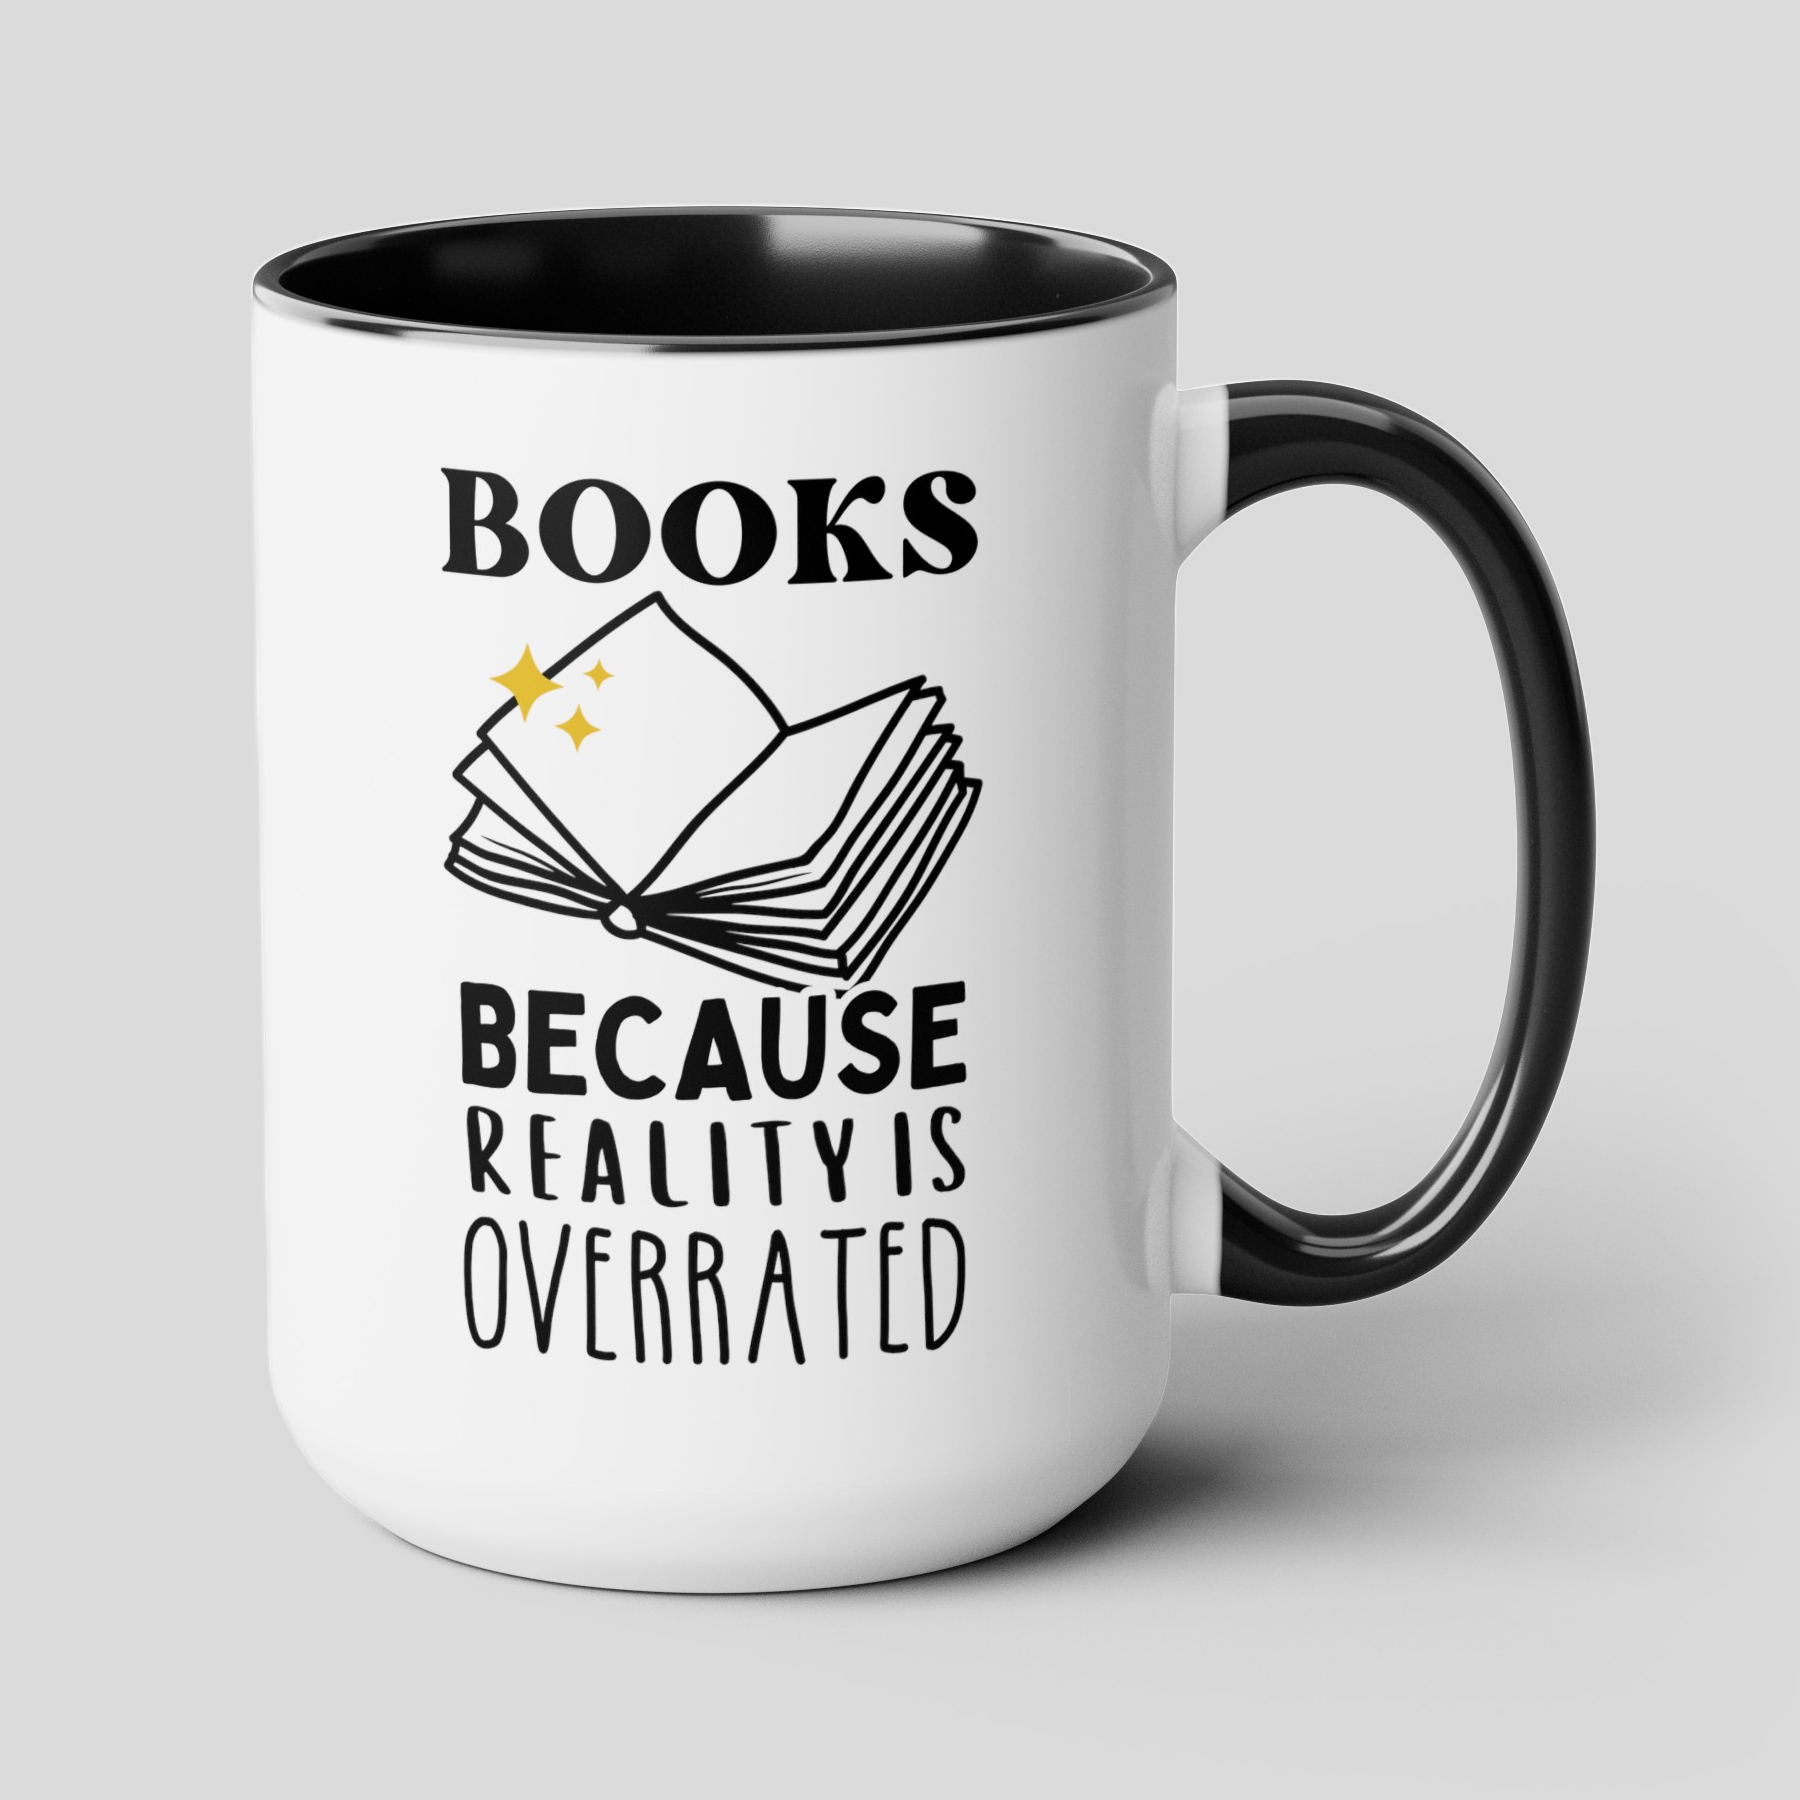 Books Because Reality Is Overrated 15oz white with black accent funny large coffee mug gift for her him book lover reading librarian teacher quote waveywares wavey wares wavywares wavy wares cover